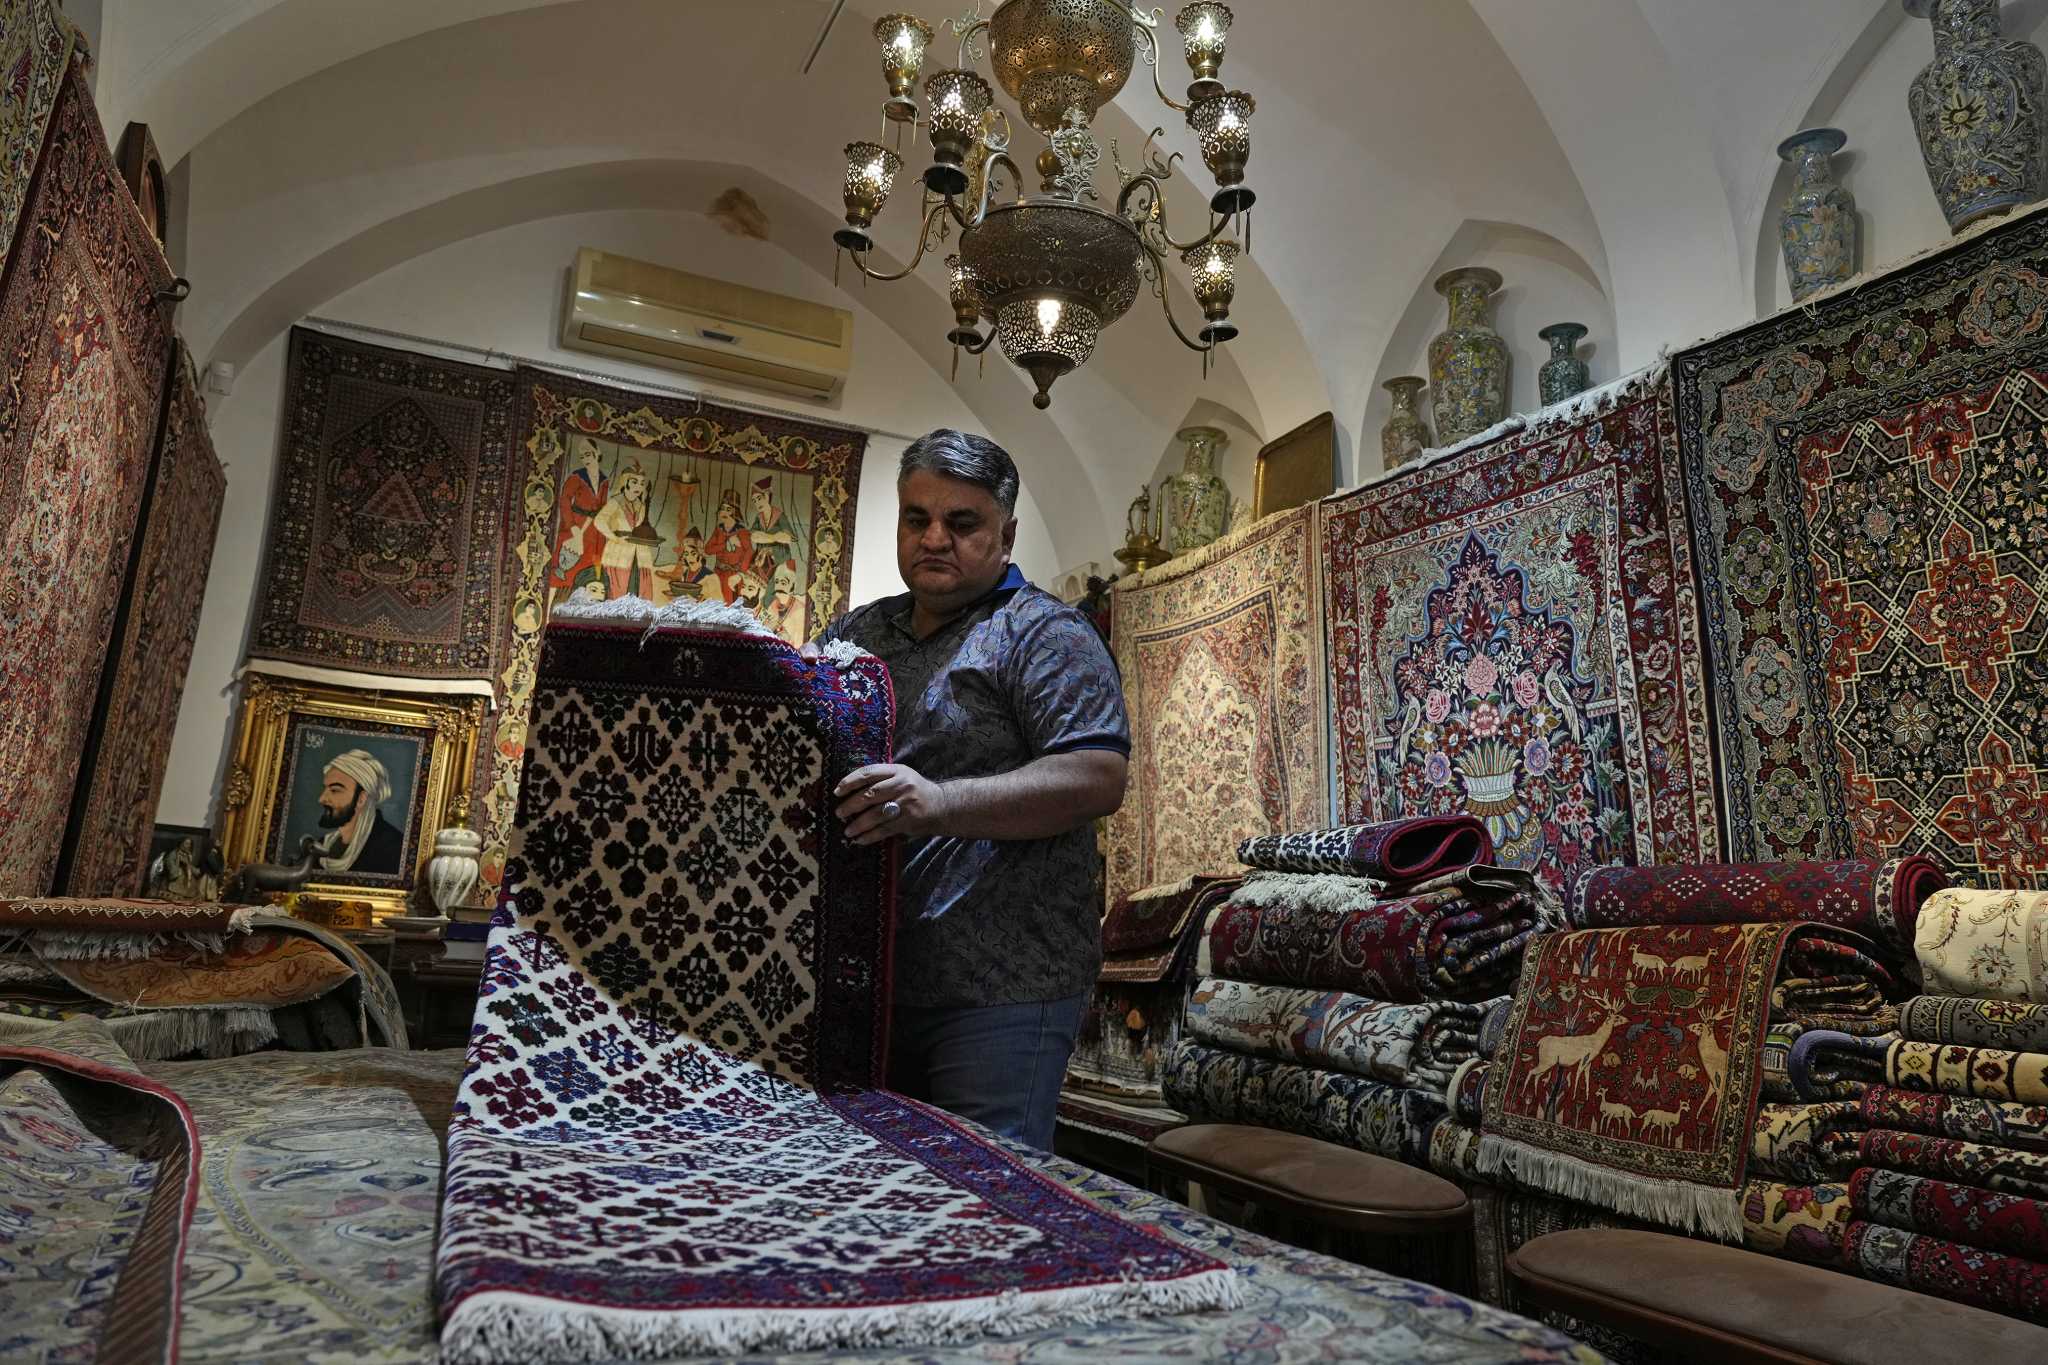 Sanctions and a hobbled economy pull the rug out from under Iran's traditional carpet weavers